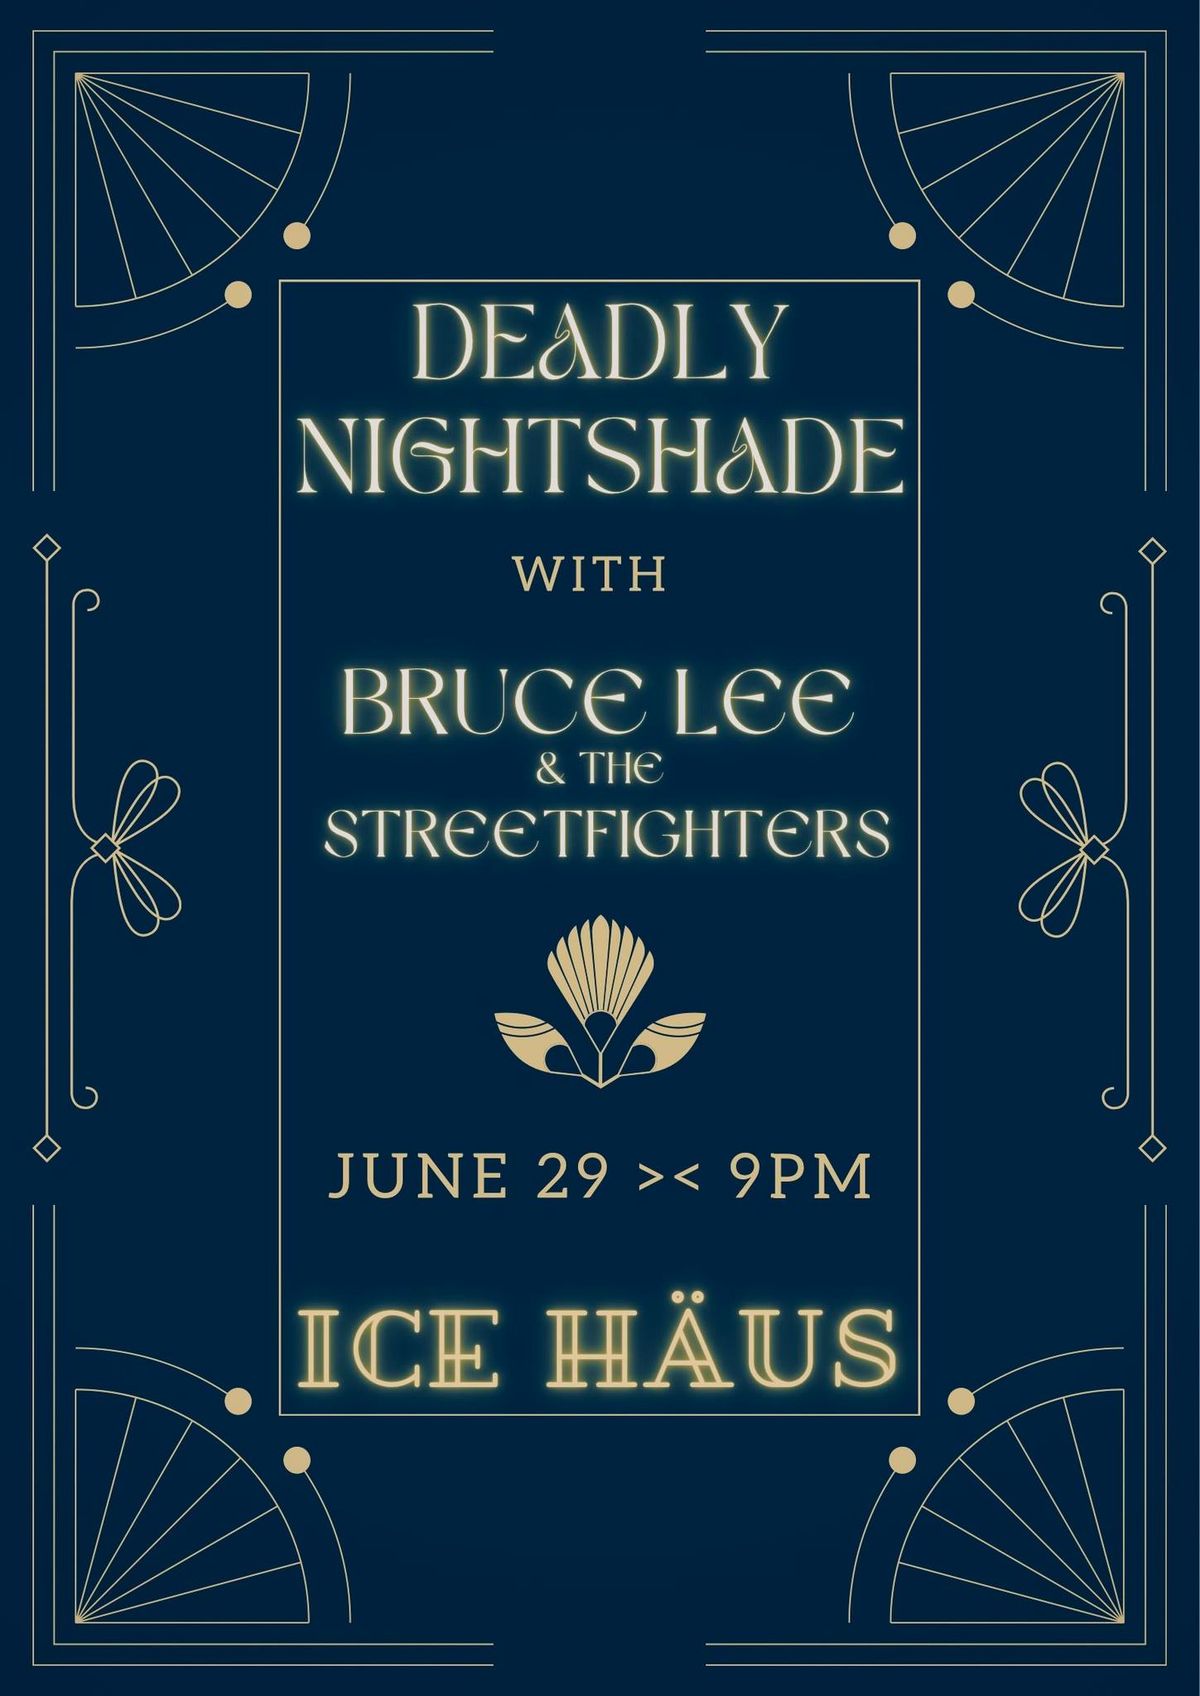 Deadly Nightshade with Bruce Lee & the Streetfighters Live at the Ice Haus